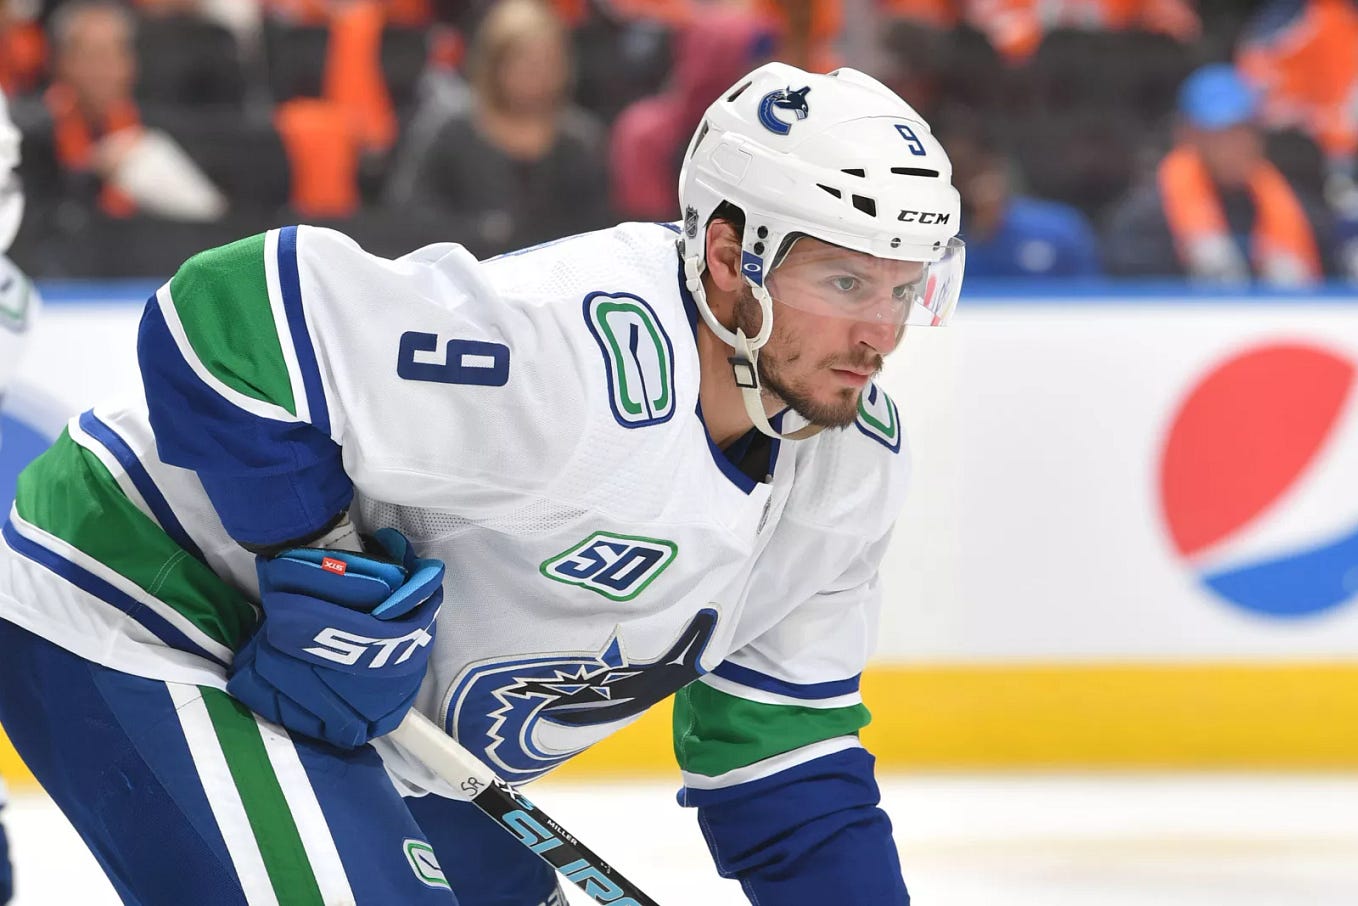 Canucks Alternate Jersey History. The Canucks and their uniforms have…, by  Bryce Ferguson